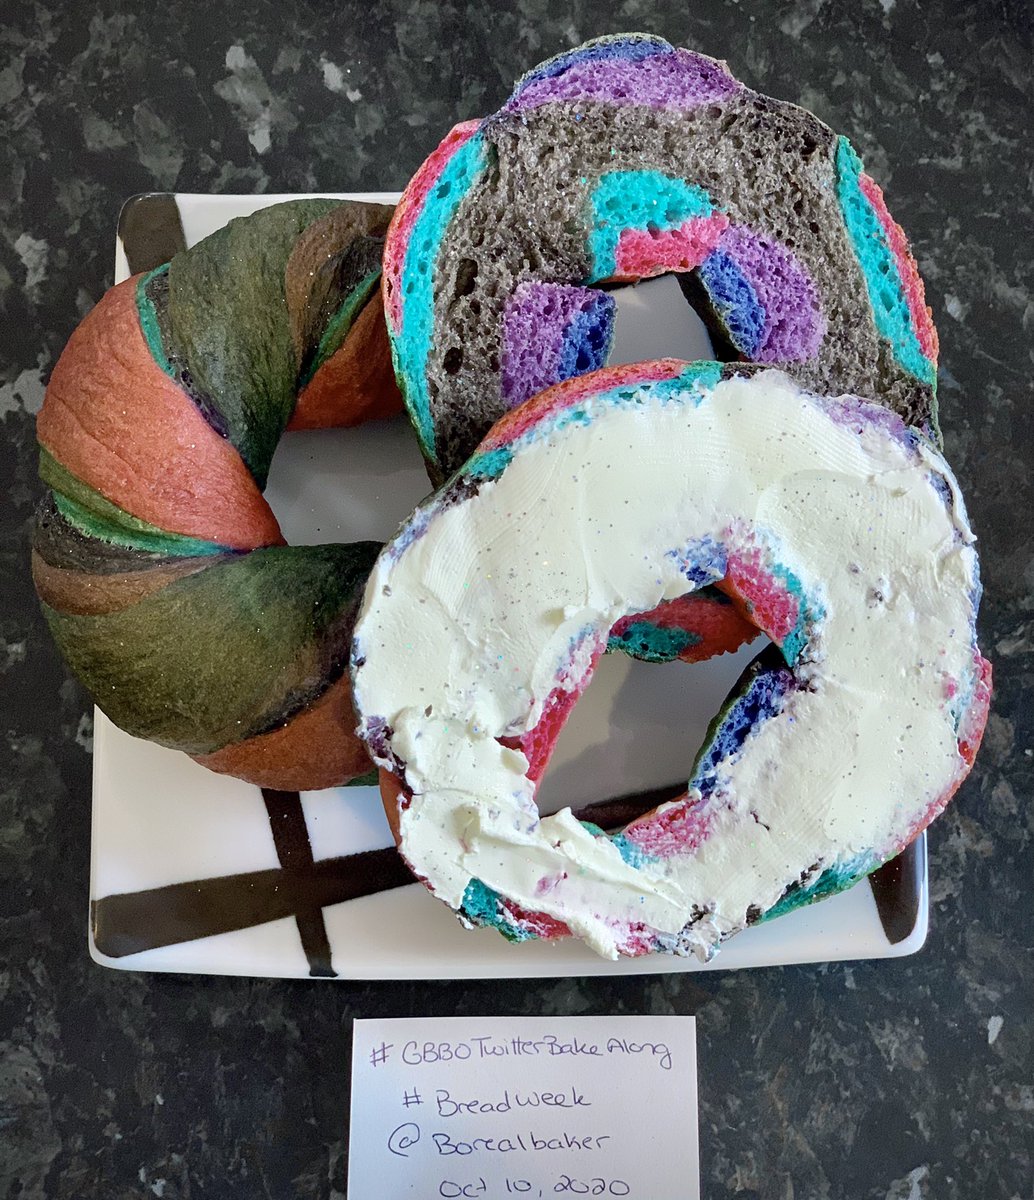 For attempt making #bagels... not my finest, but they sure do taste nice! We did galaxy colours instead of rainbow.  @Rob_C_Allen @thebakingnanna1 @WoodWhispers #GBBO #GBBOTwitterBakeAlong #breadweek #galaxy #SaturdayMorning